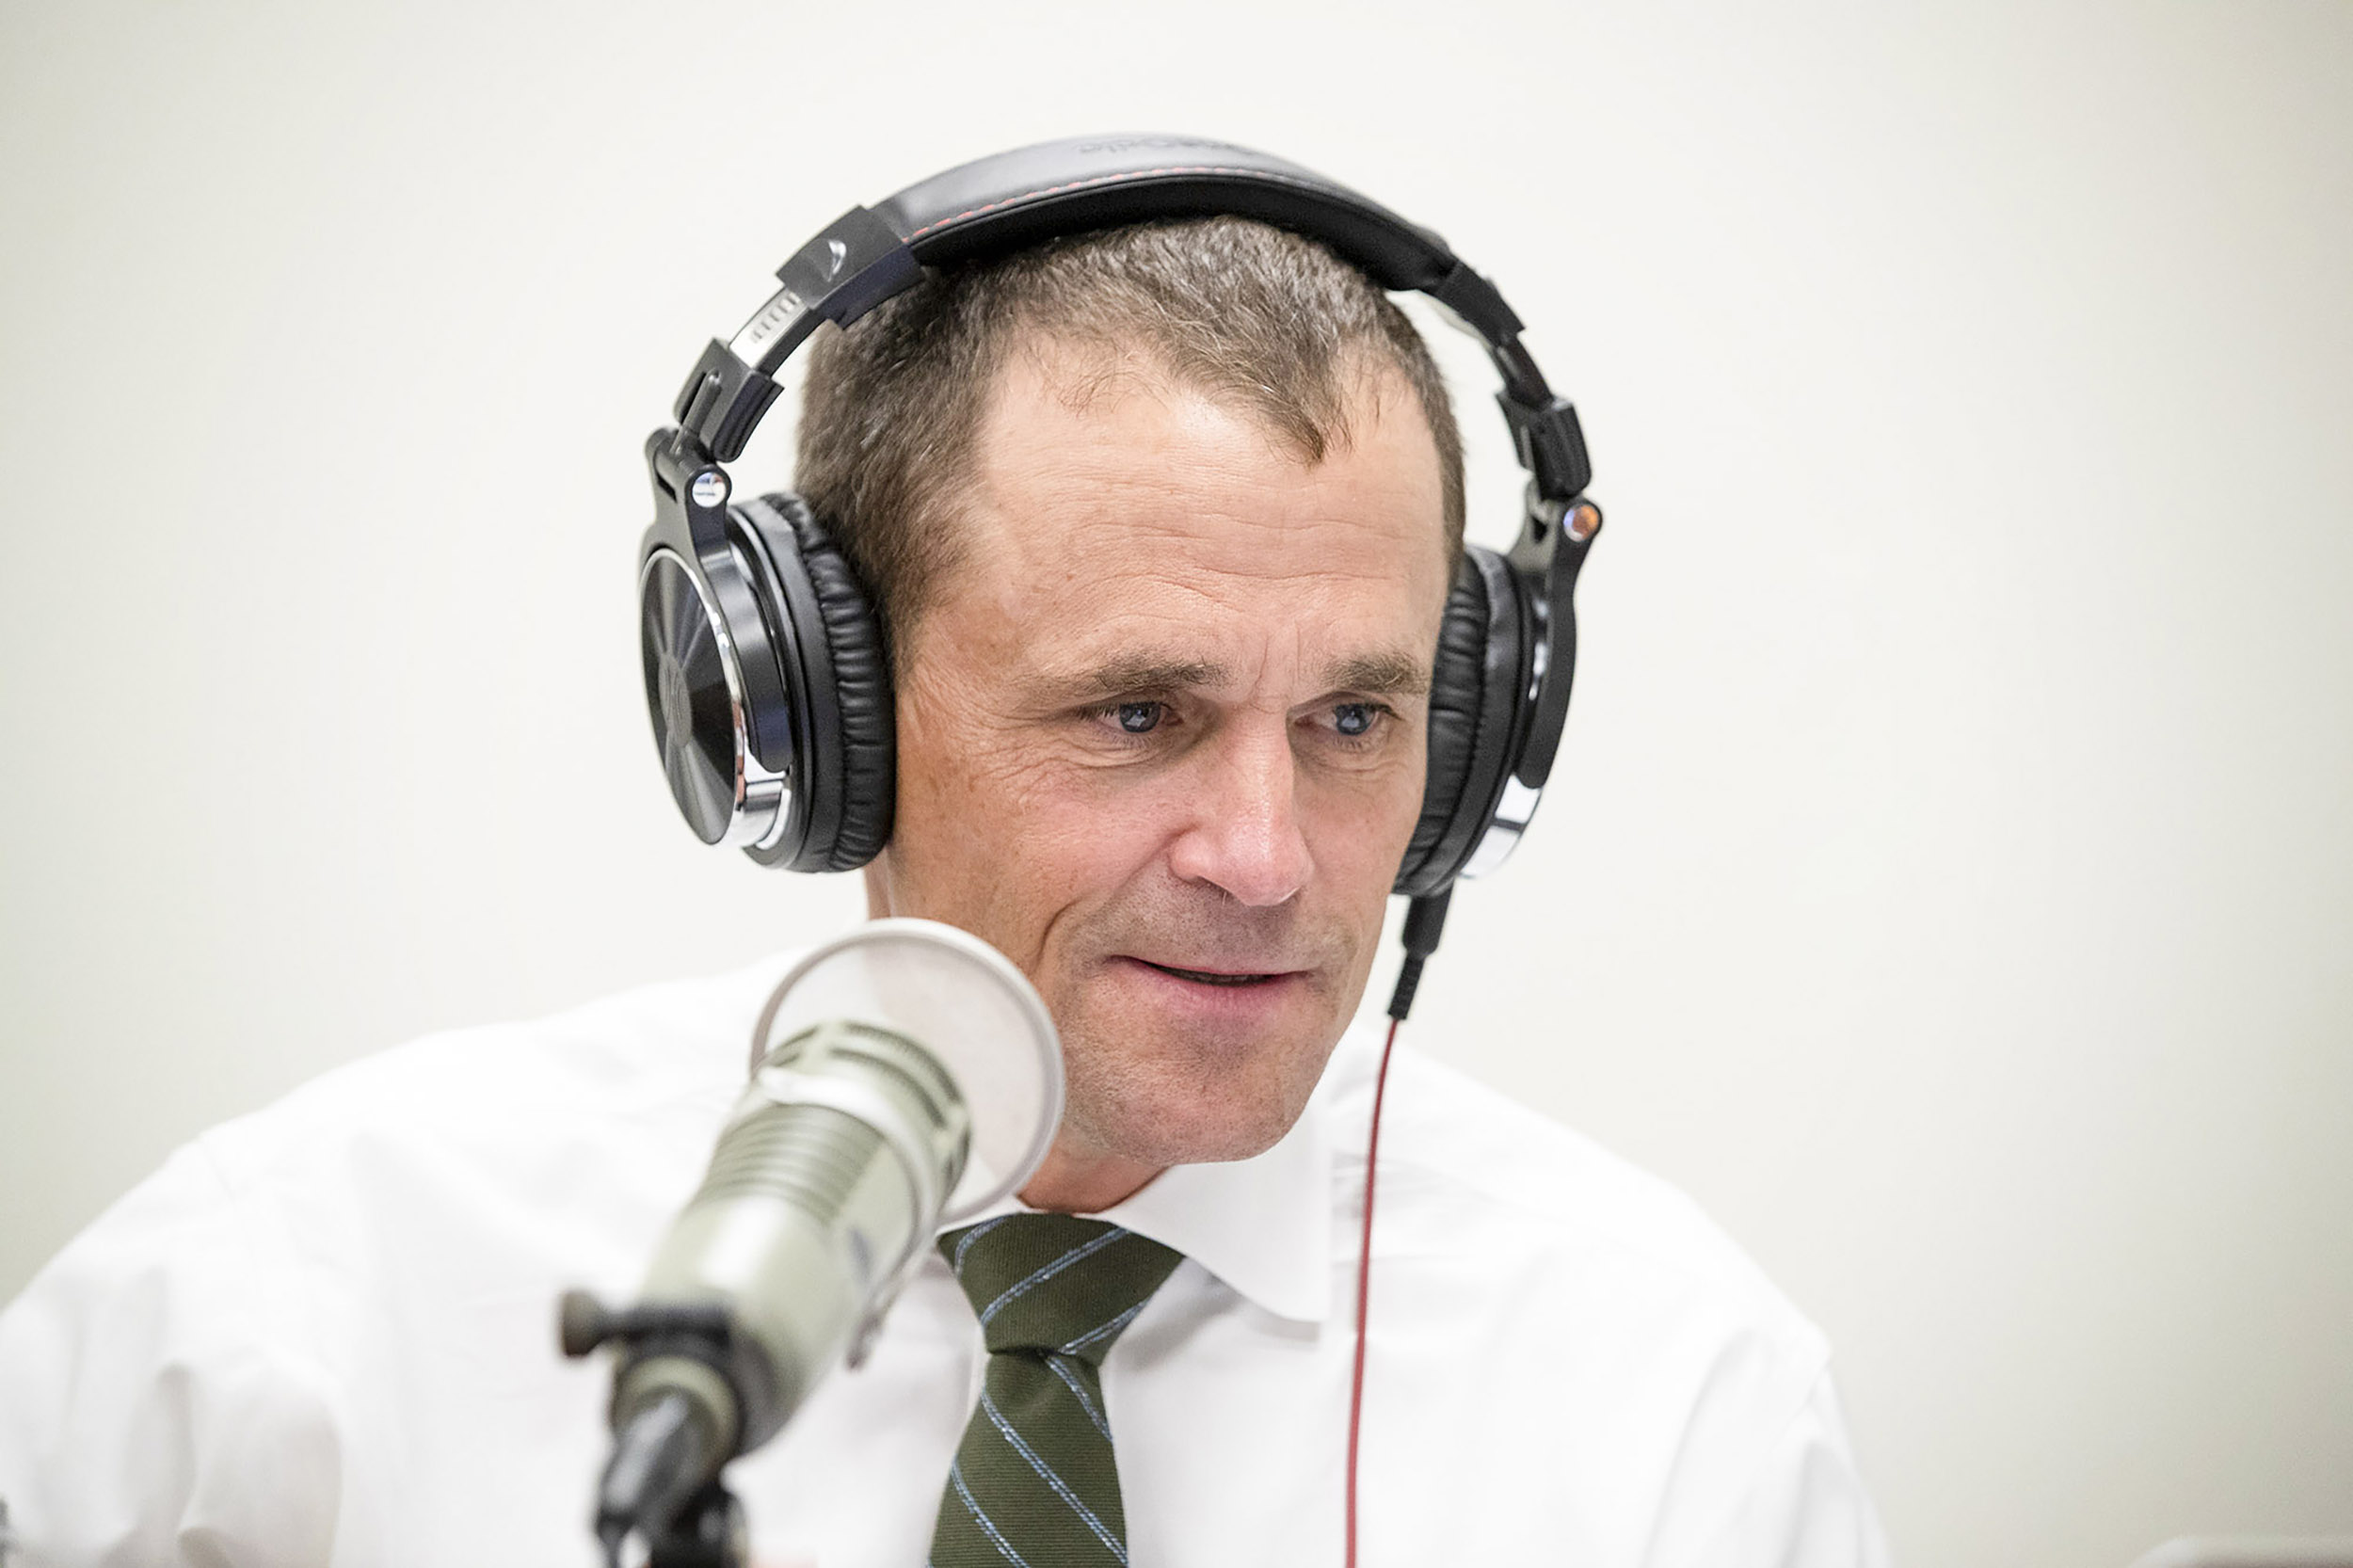 President Jim Ryan with headphones and microphone during his podcast